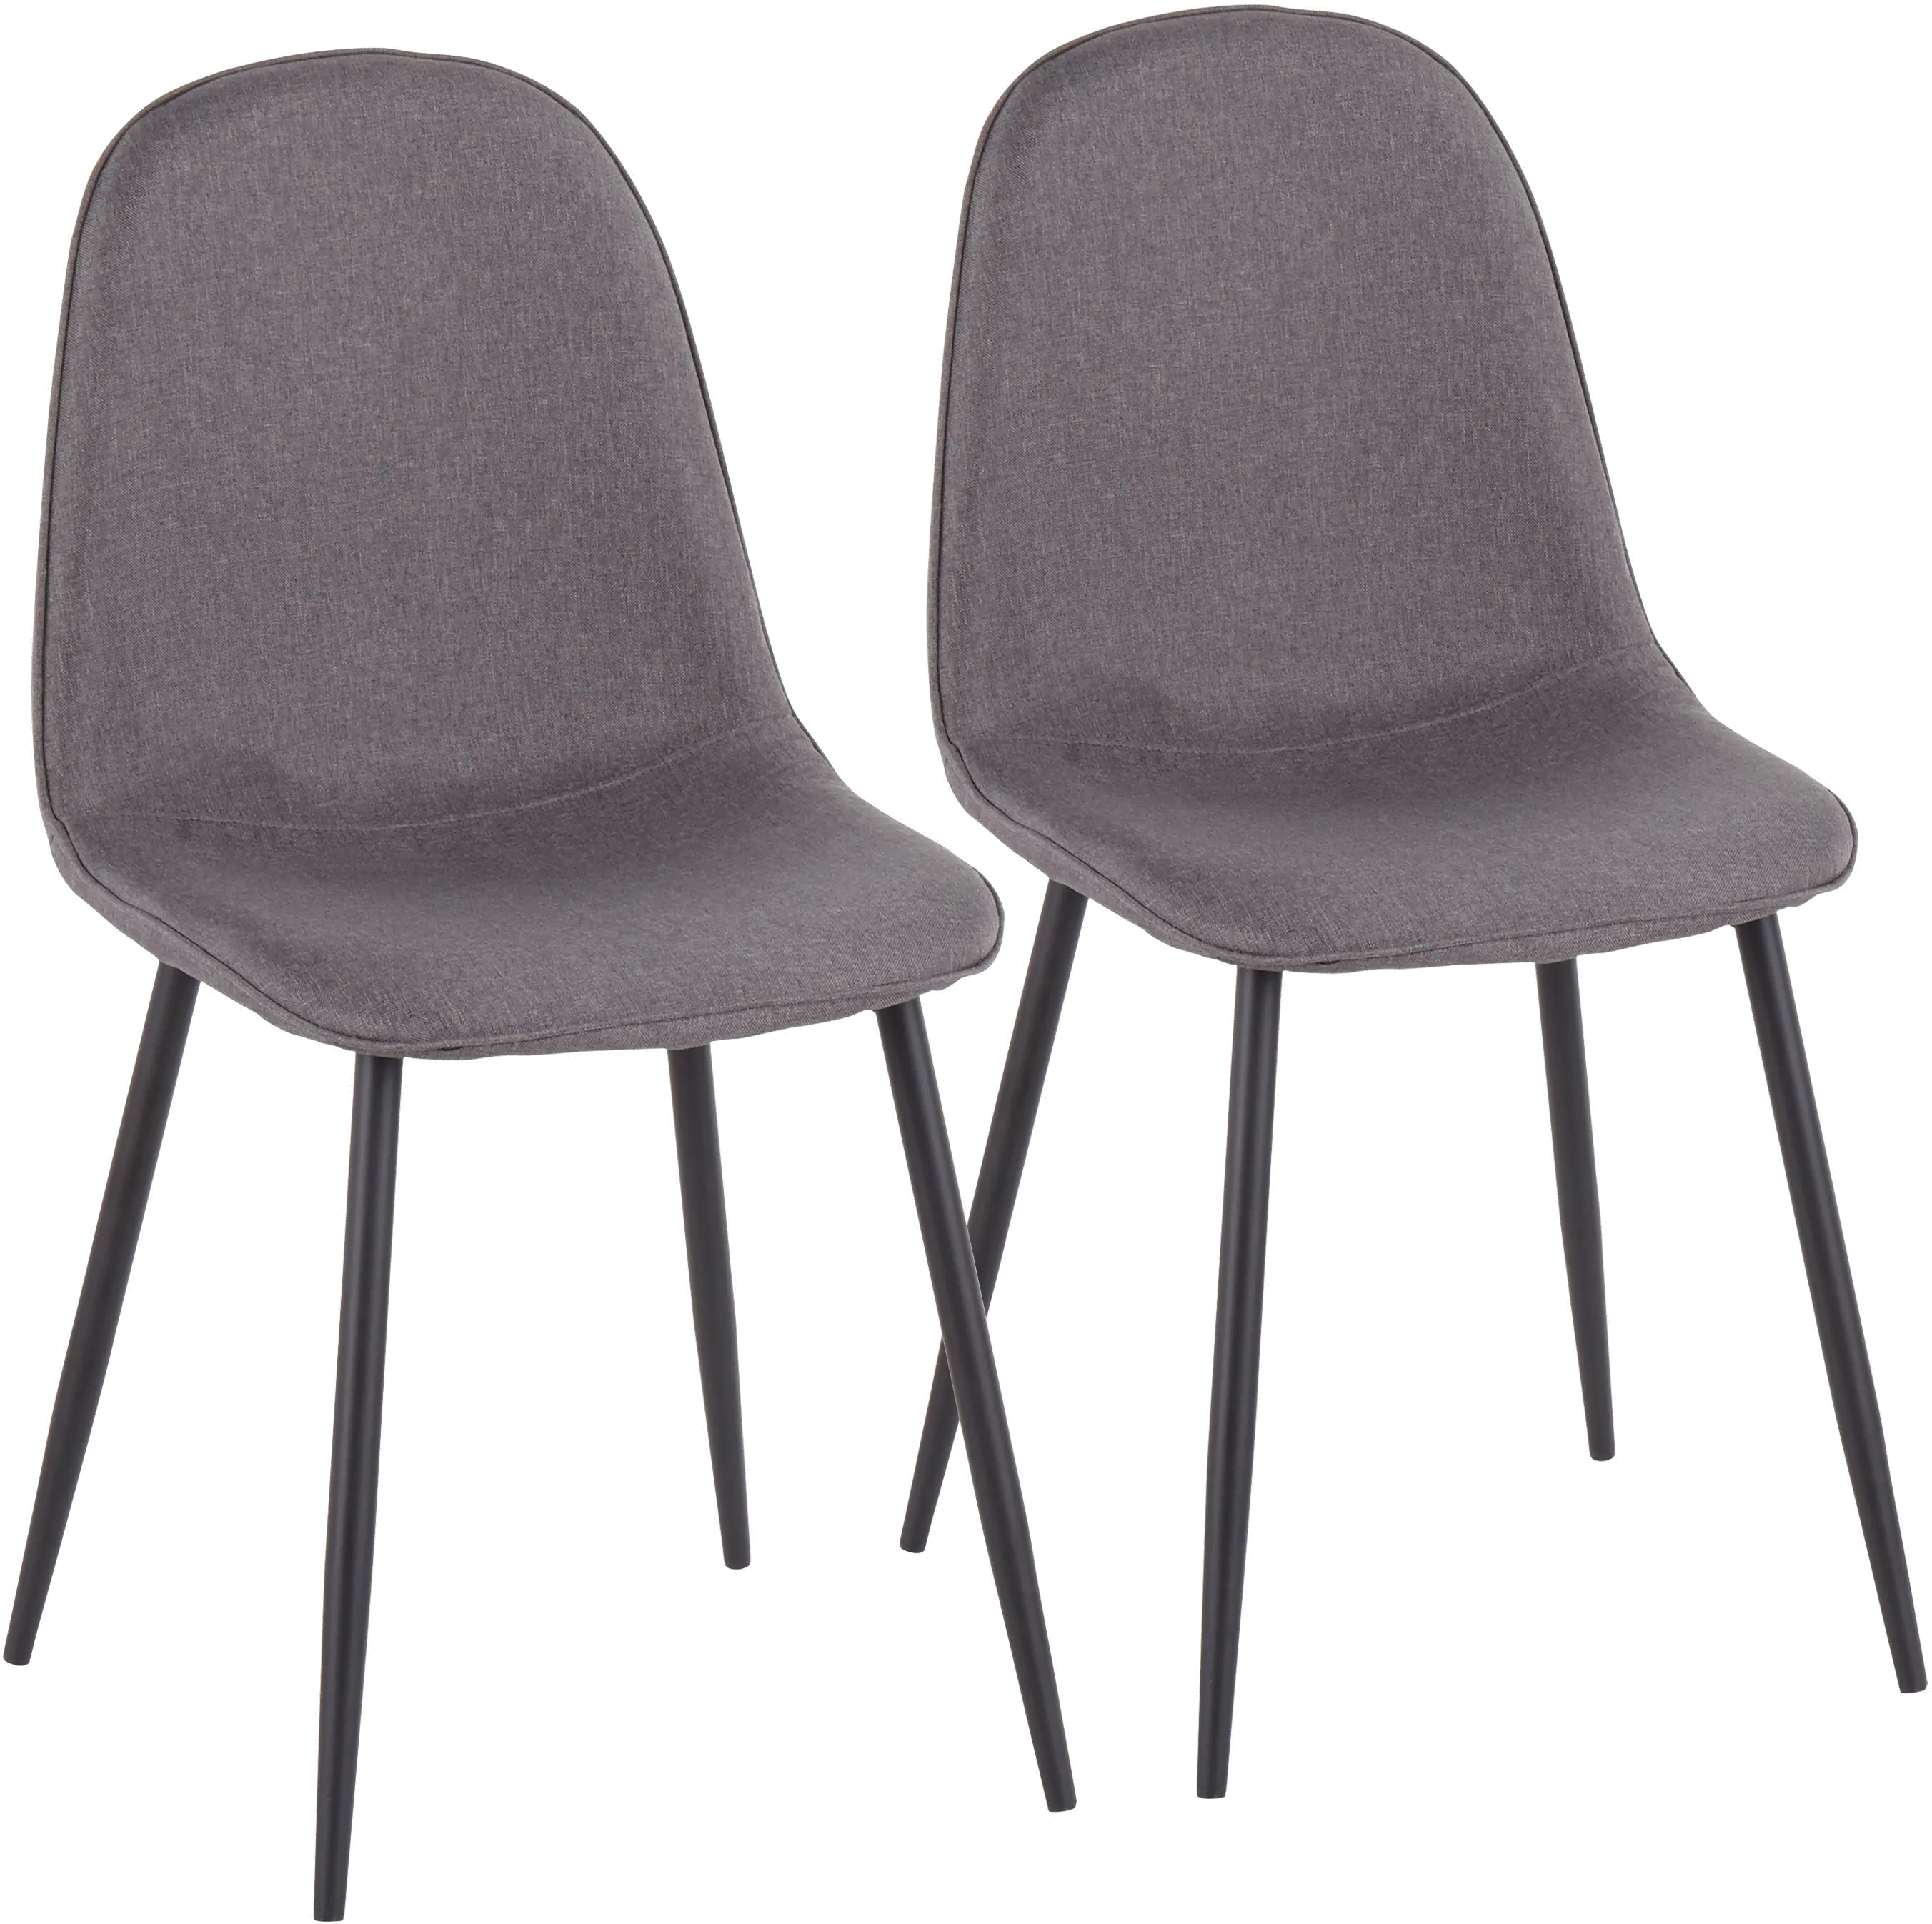 Photos - Chair Lumisource Contemporary Gray and Black Dining Room   - Pebb(Set of 2)